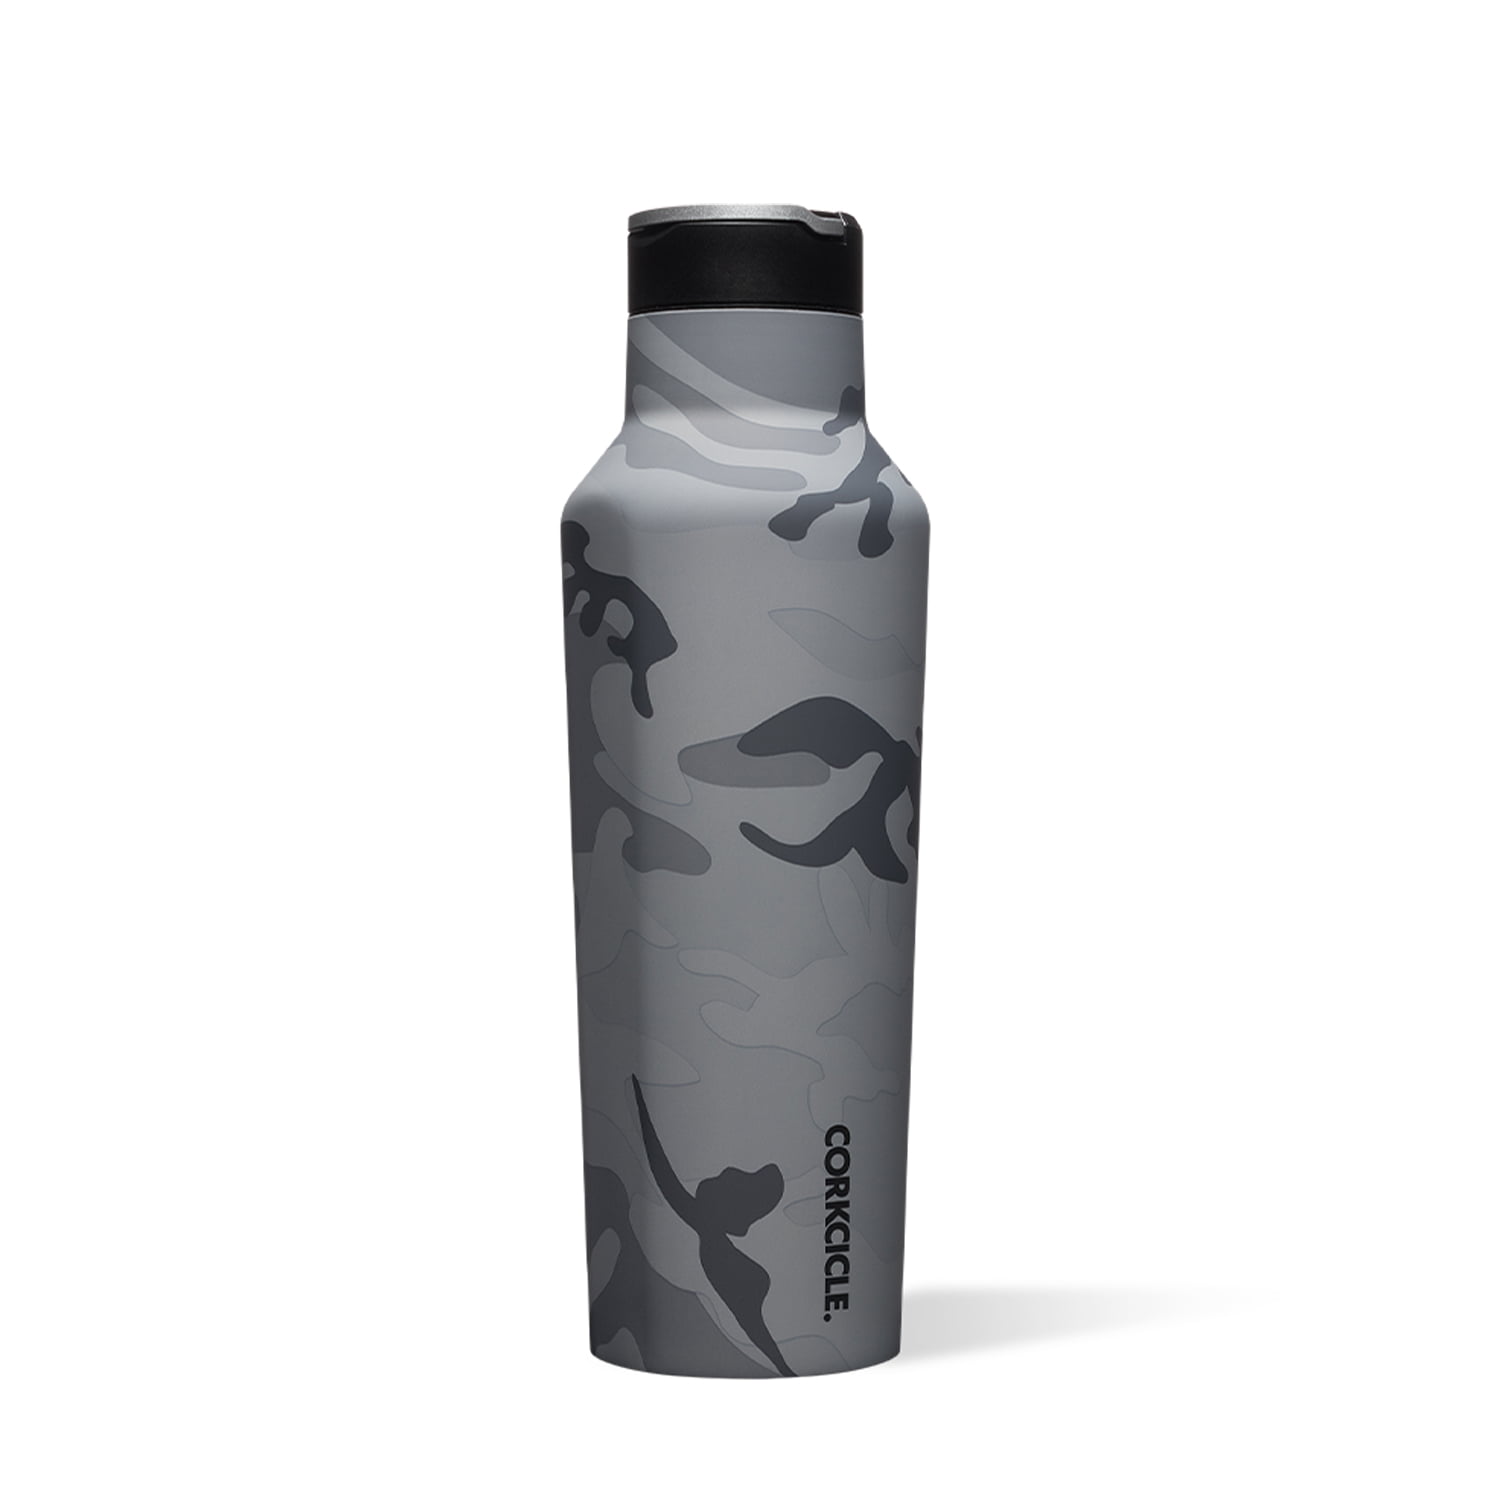 Corkcicle Origins Canteen Triple Insulated Stainless Steel Water Bottle 9 oz 